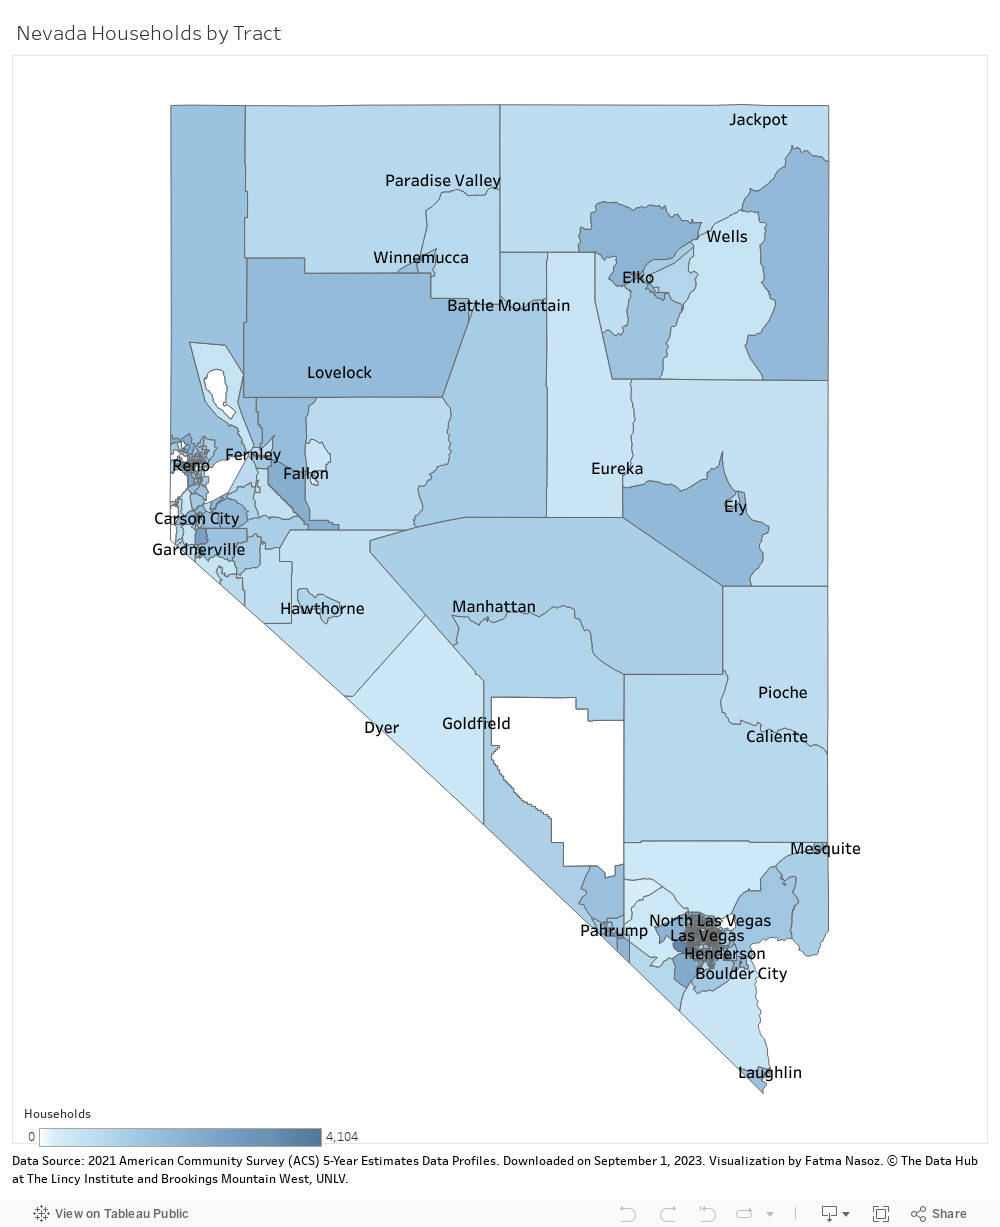 Nevada Households by Tract DB 